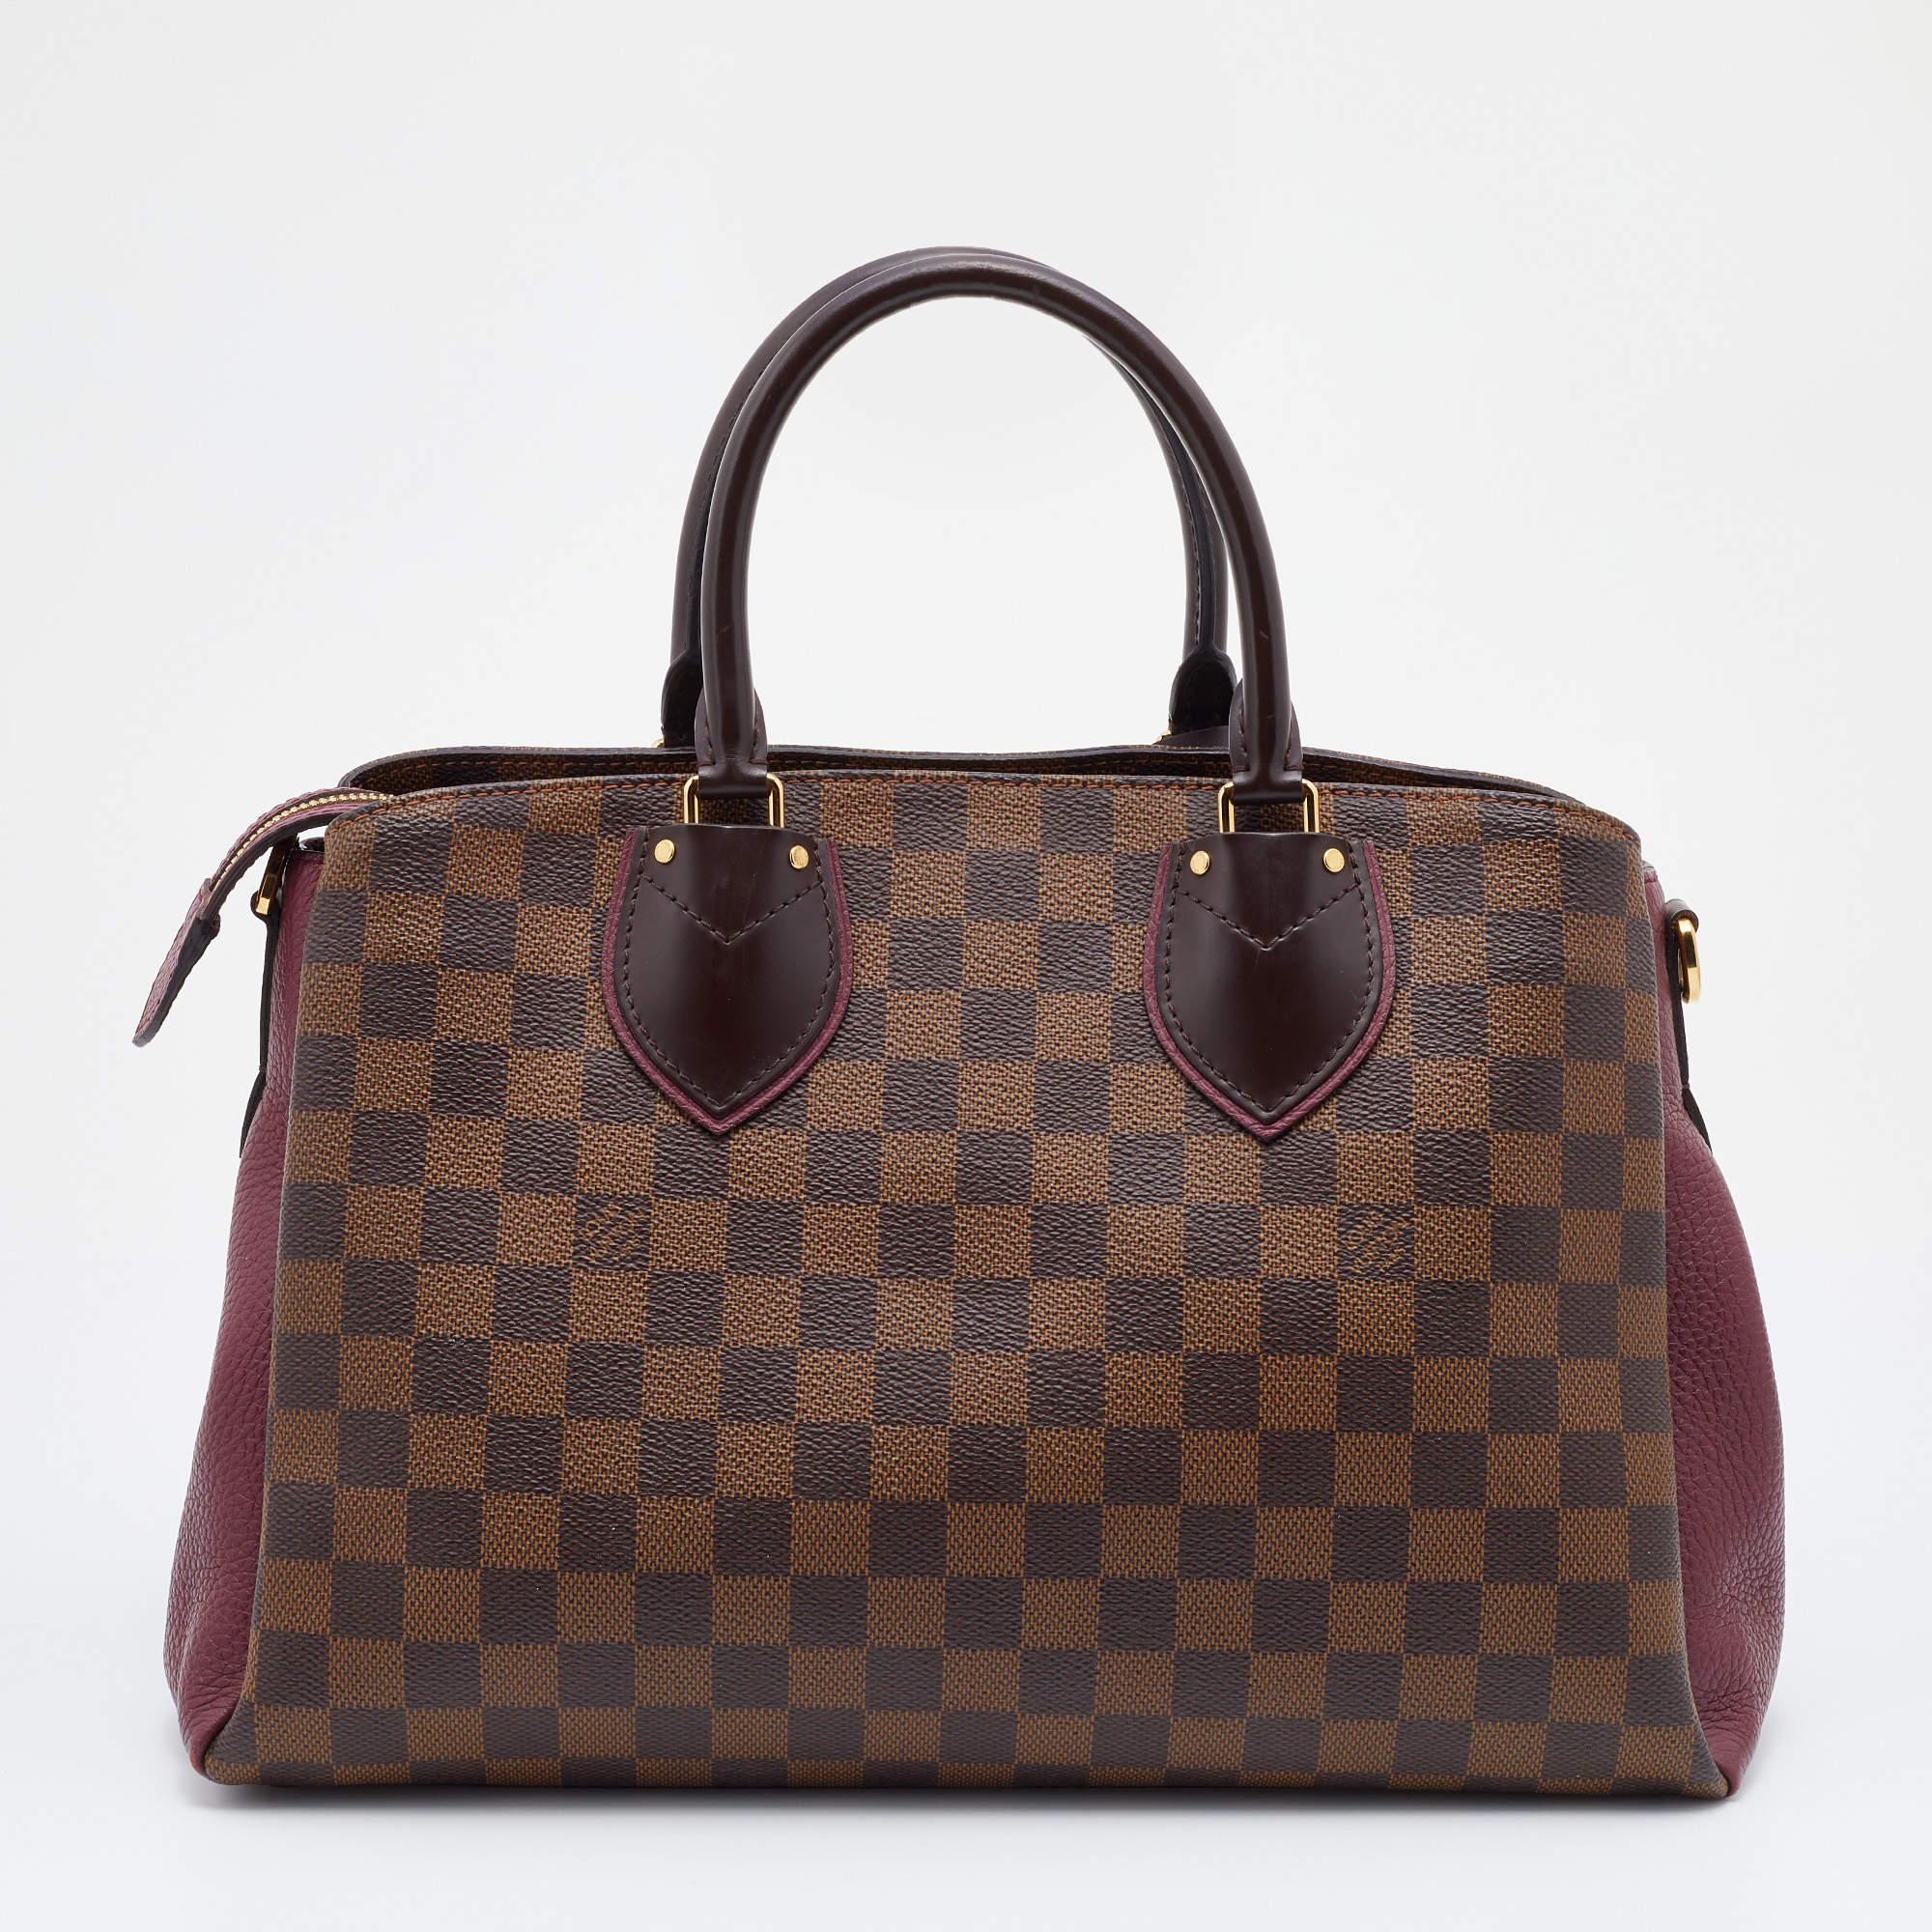 Sophisticated and high on style, Louis Vuitton's Normandy bag will be a valuable addition to your handbag collection. Crafted from coated canvas and leather, the bag is held by dual top handles and is equipped with a spacious interior. It is